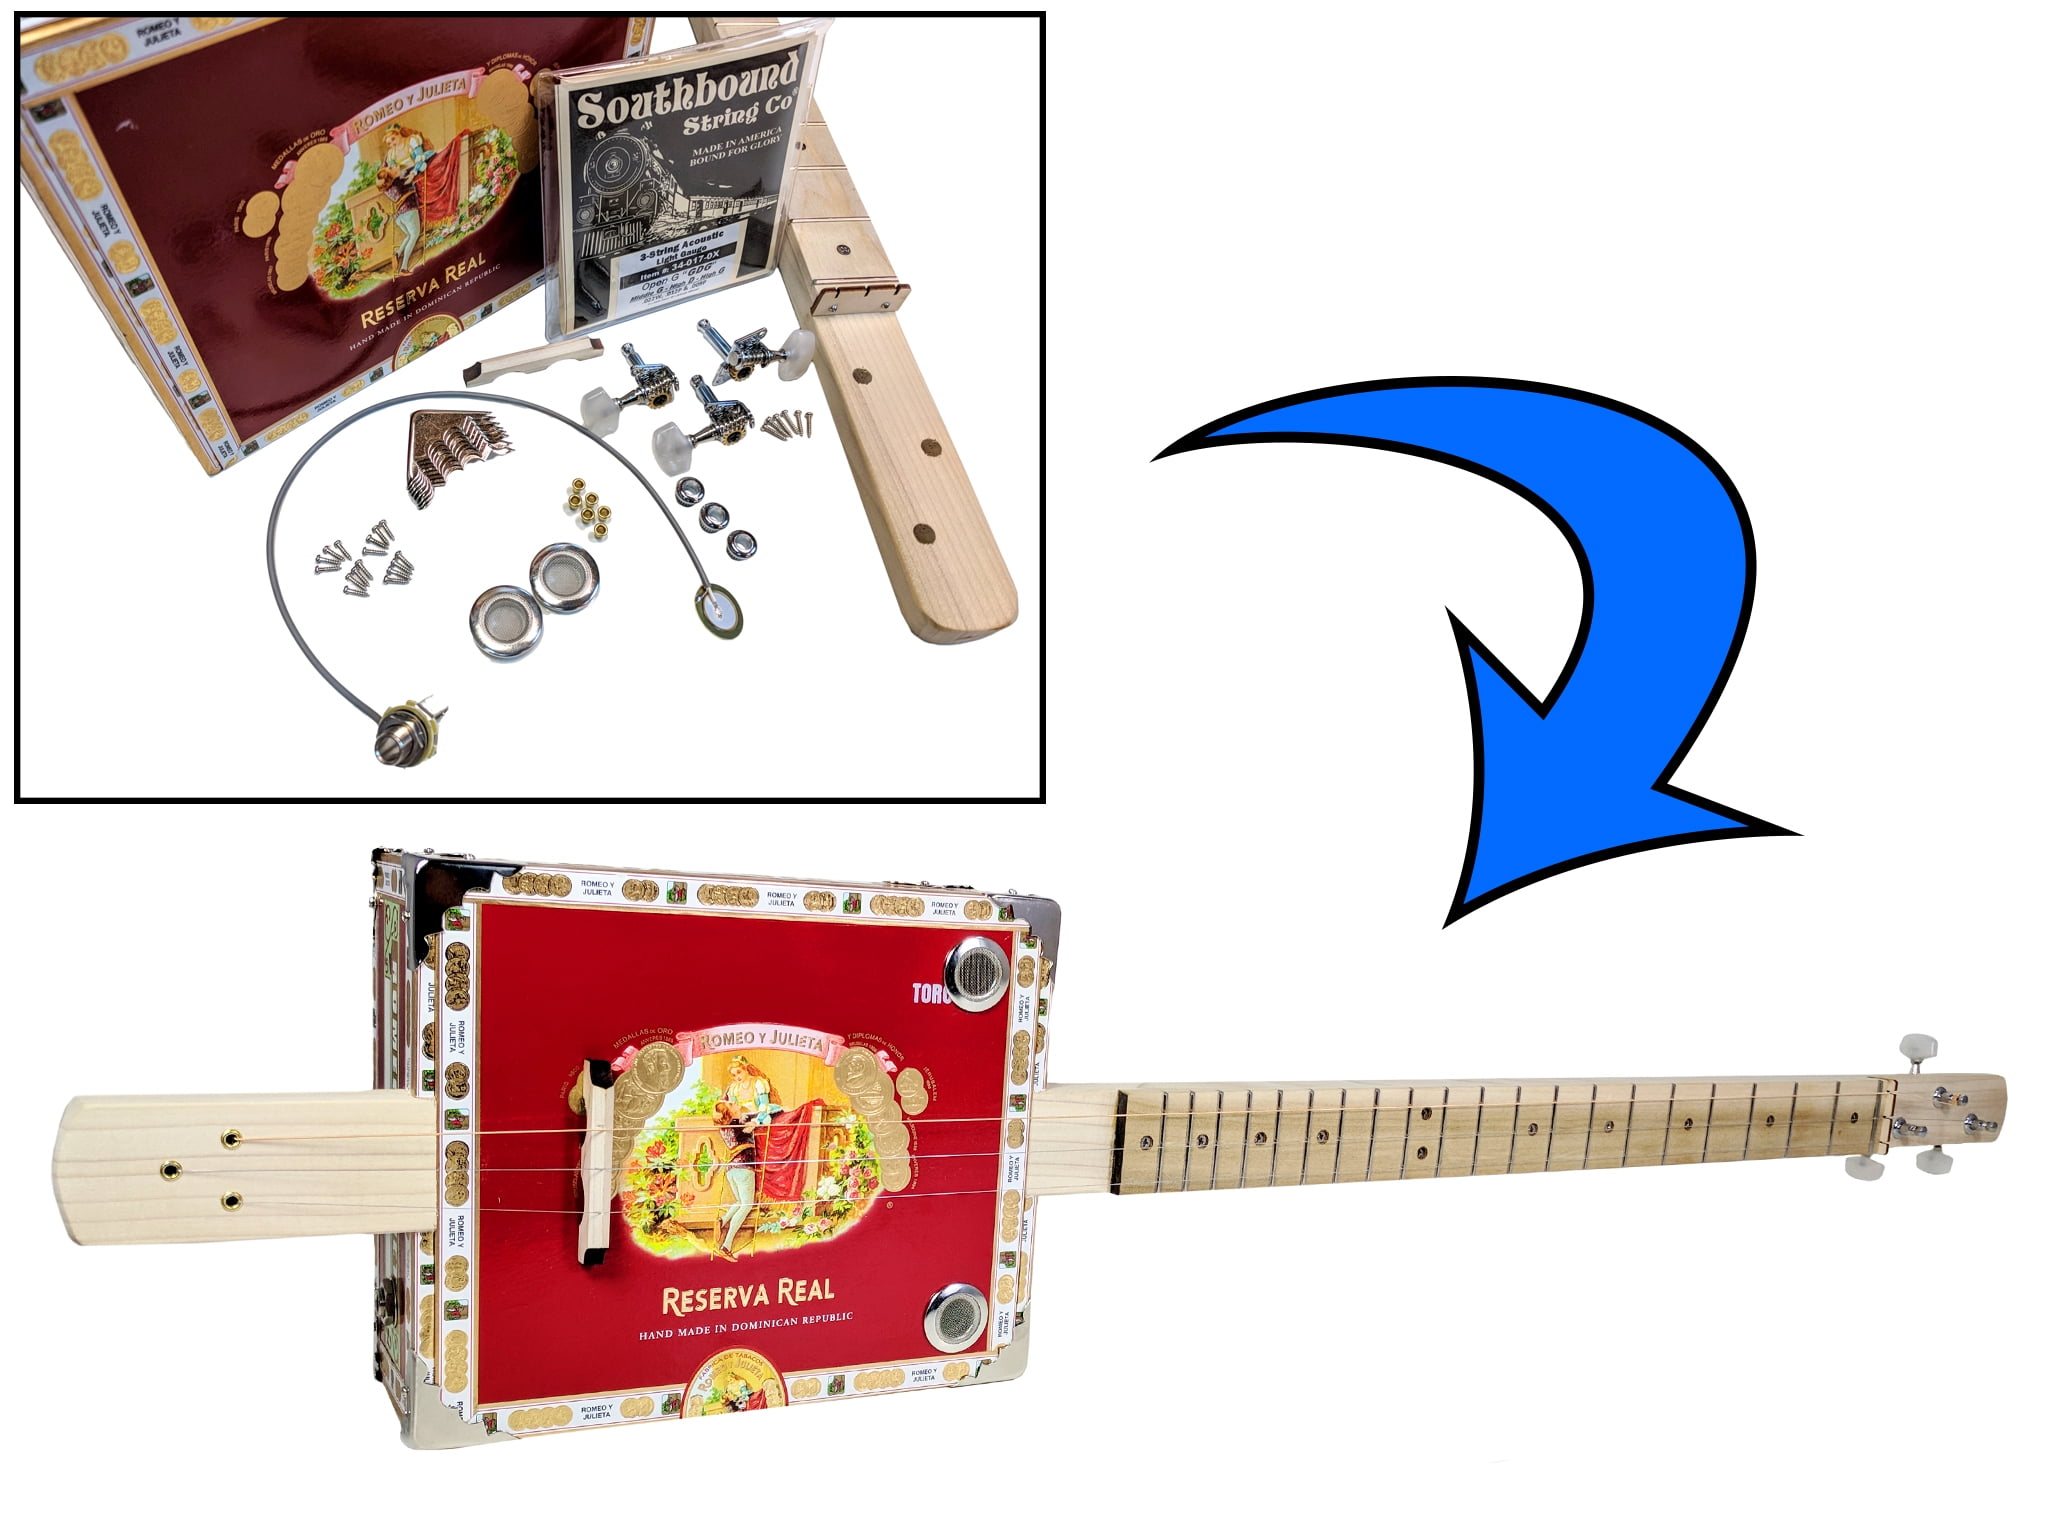 includes Acoustic/Electric Pickup Complete DIY 3-String Fretted Cigar Box Guitar Kit with Neck 